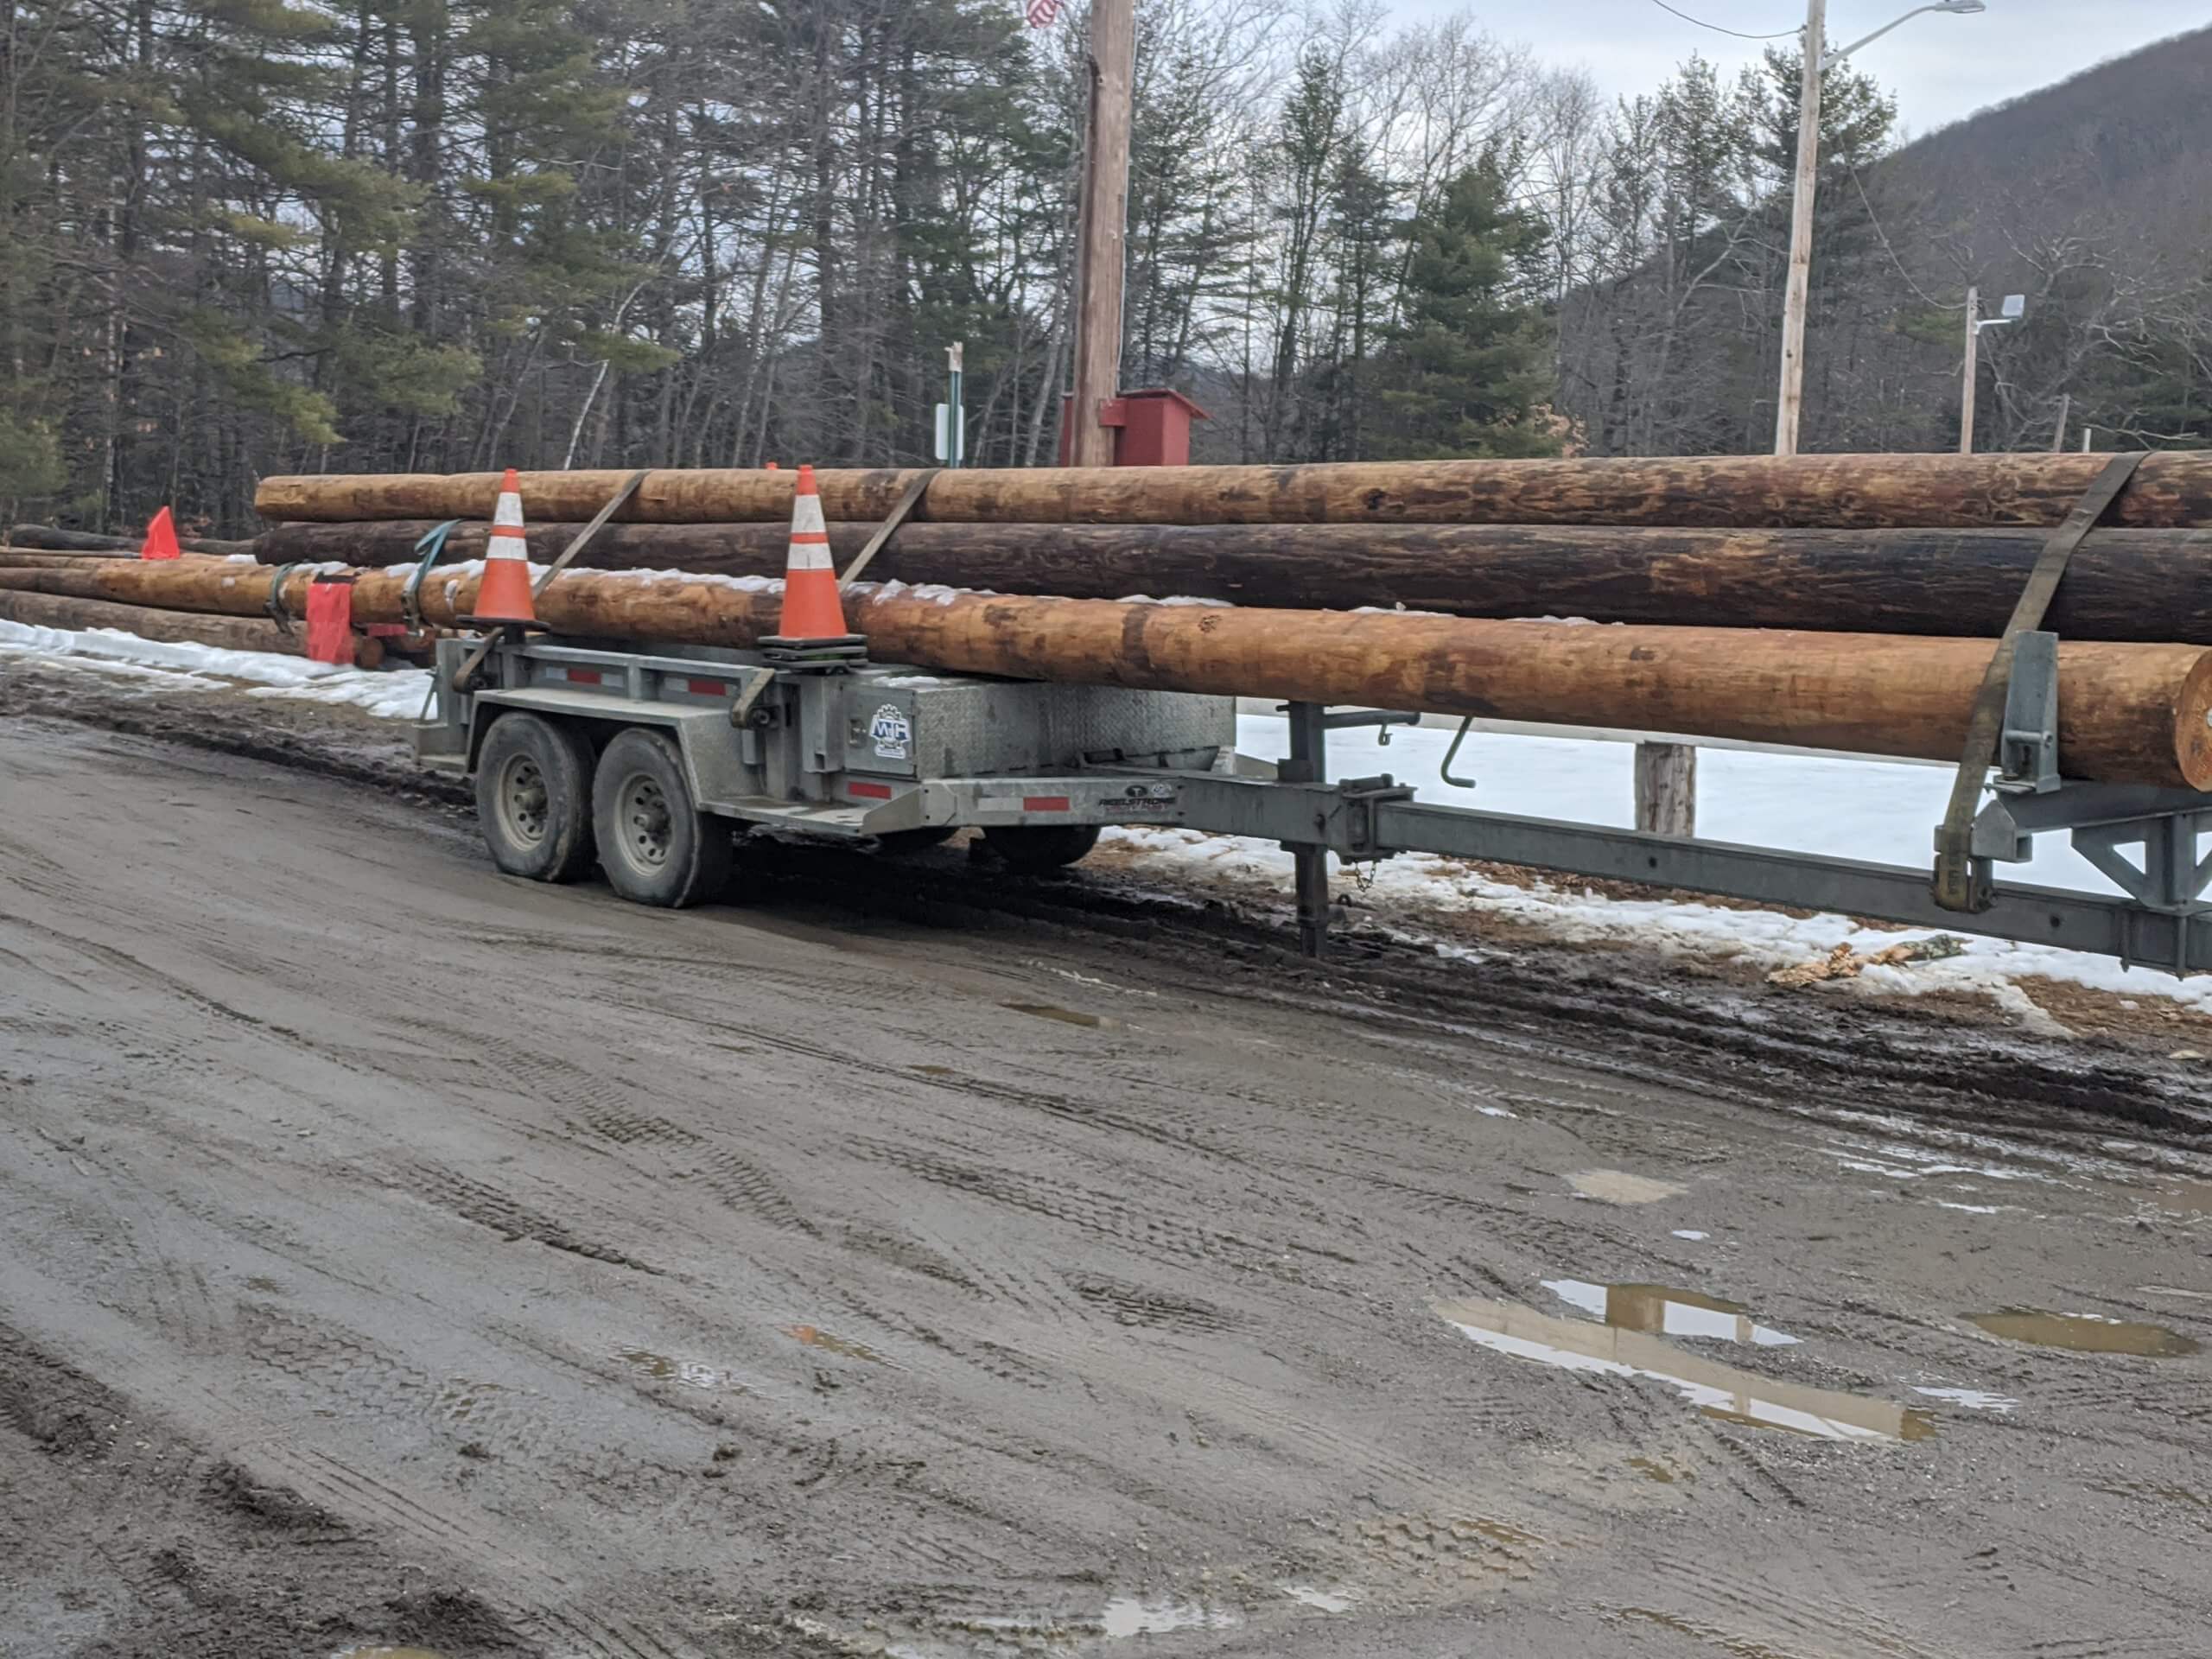 Utility poles on a trailer on a dirt road